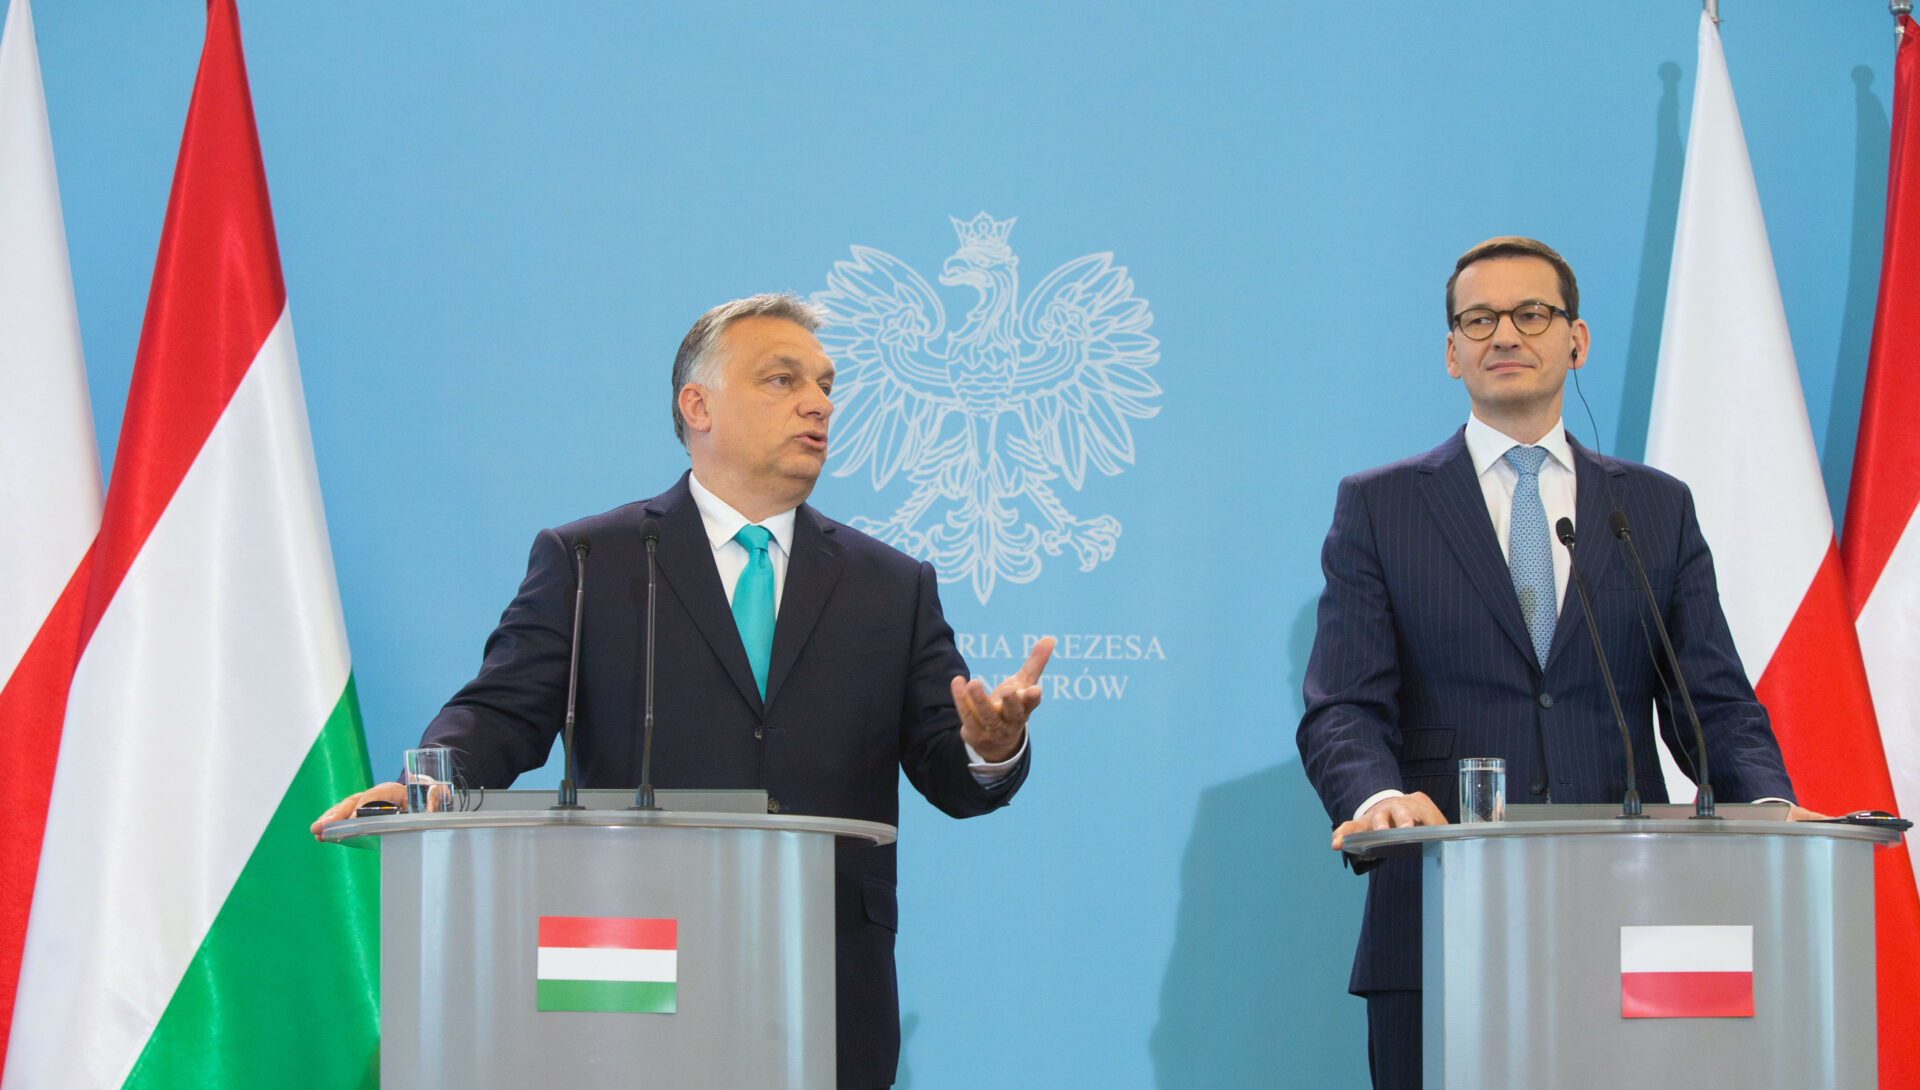 New institute will build closer relations between Polish and Hungarian youth